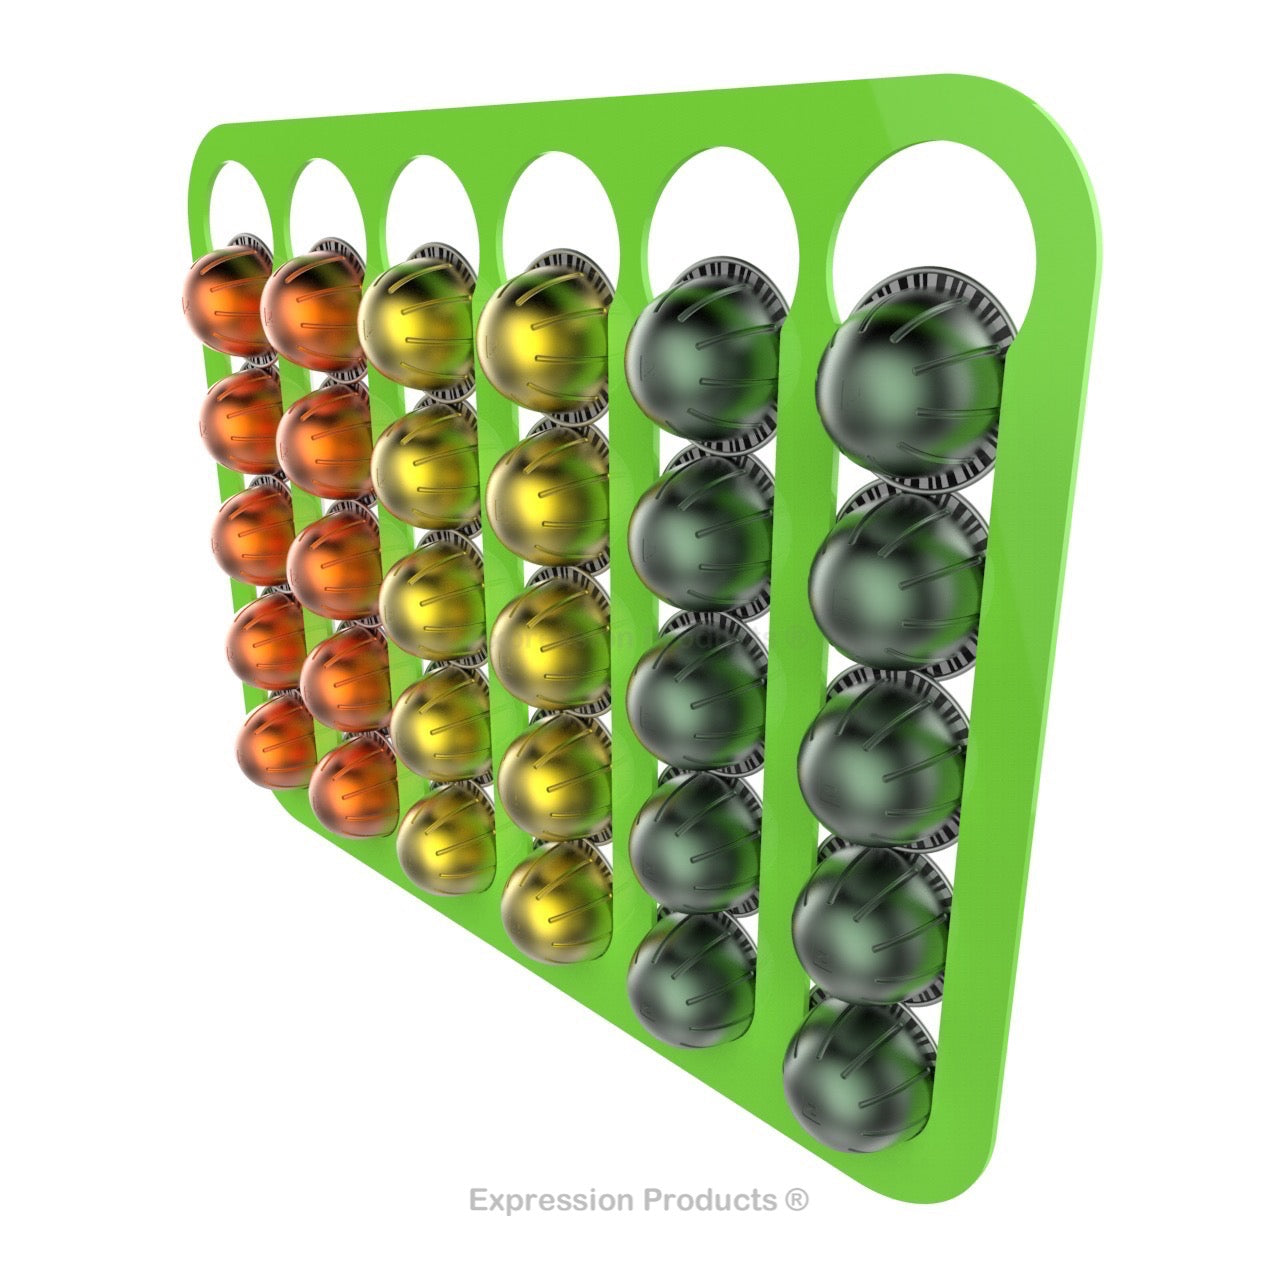 Magnetic Nespresso Vertuo capsule holder shown in lime holding 30 pods